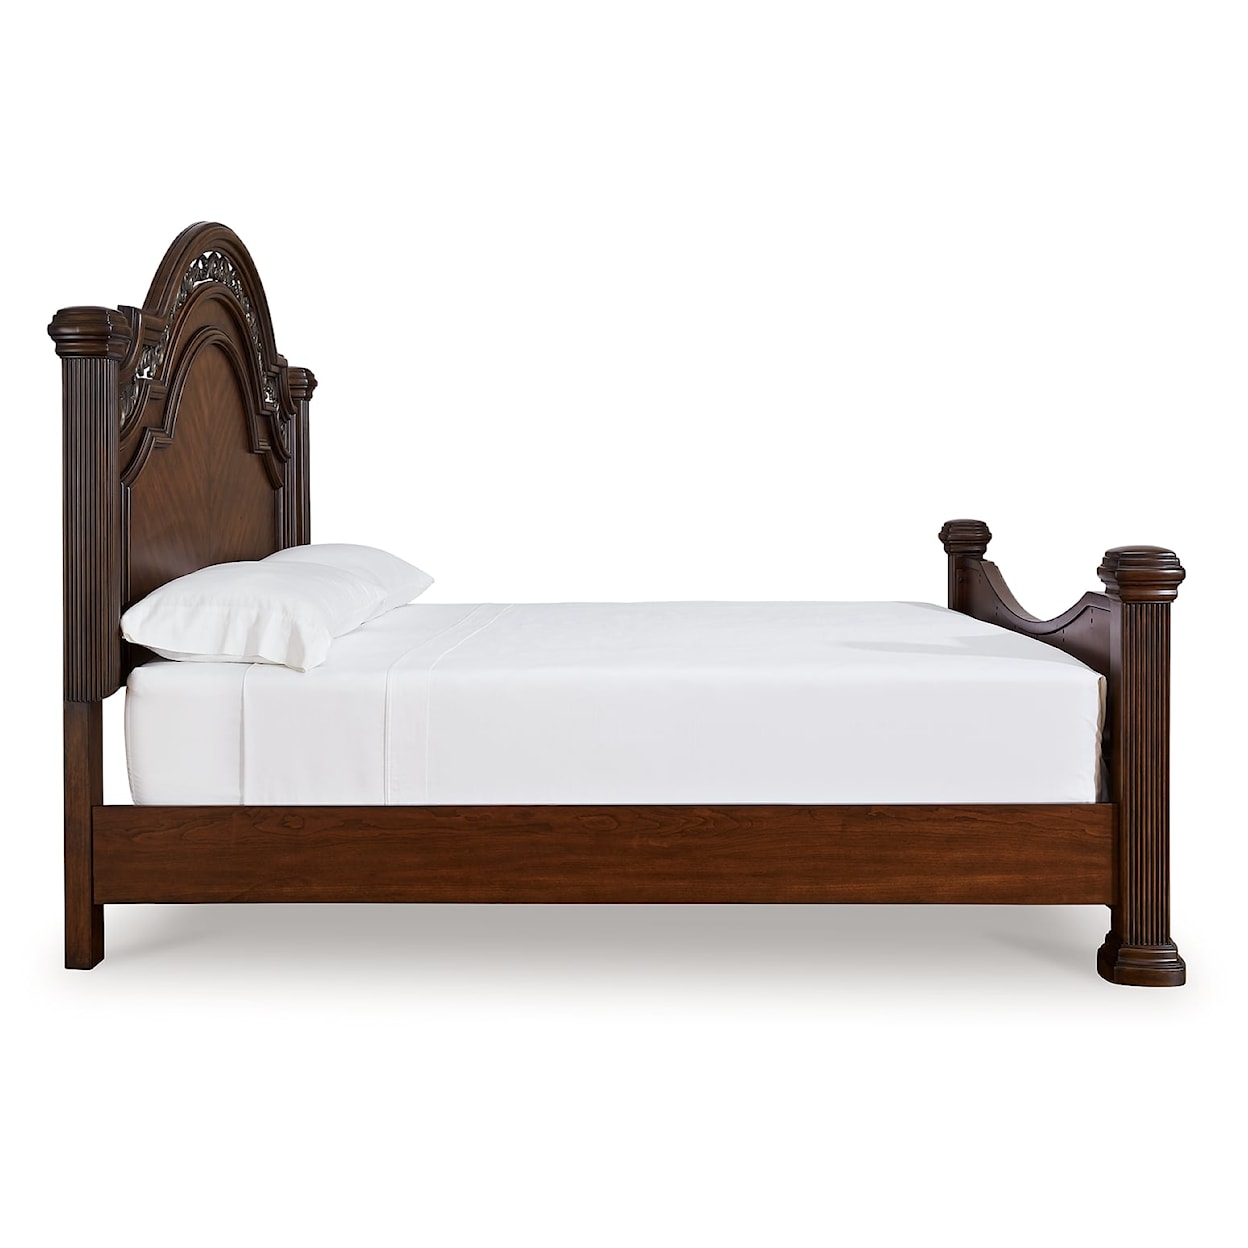 Signature Lavinton King Poster Bed